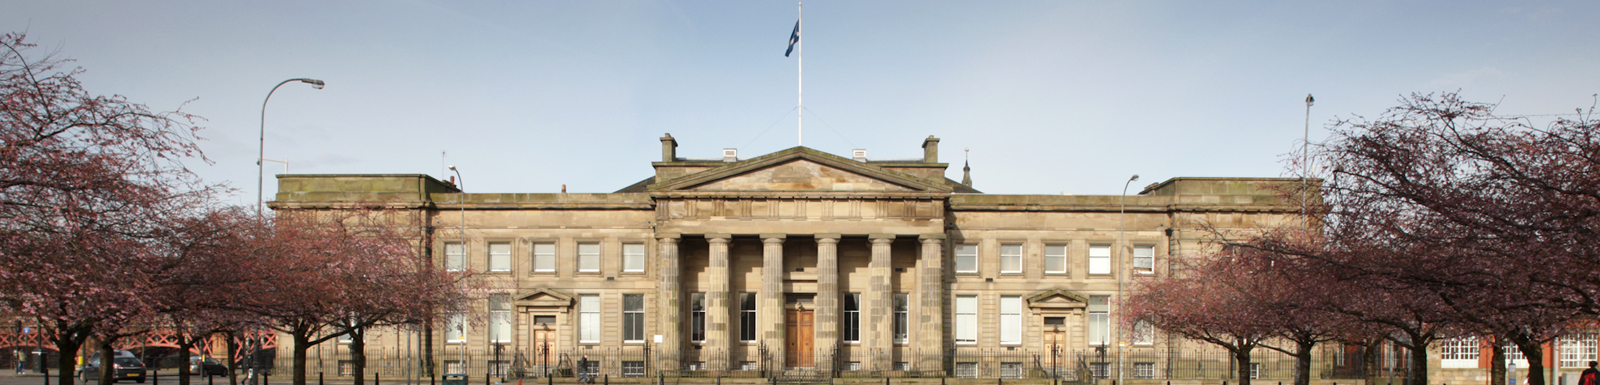 The Justiciary Courthouse at Glasgow Green